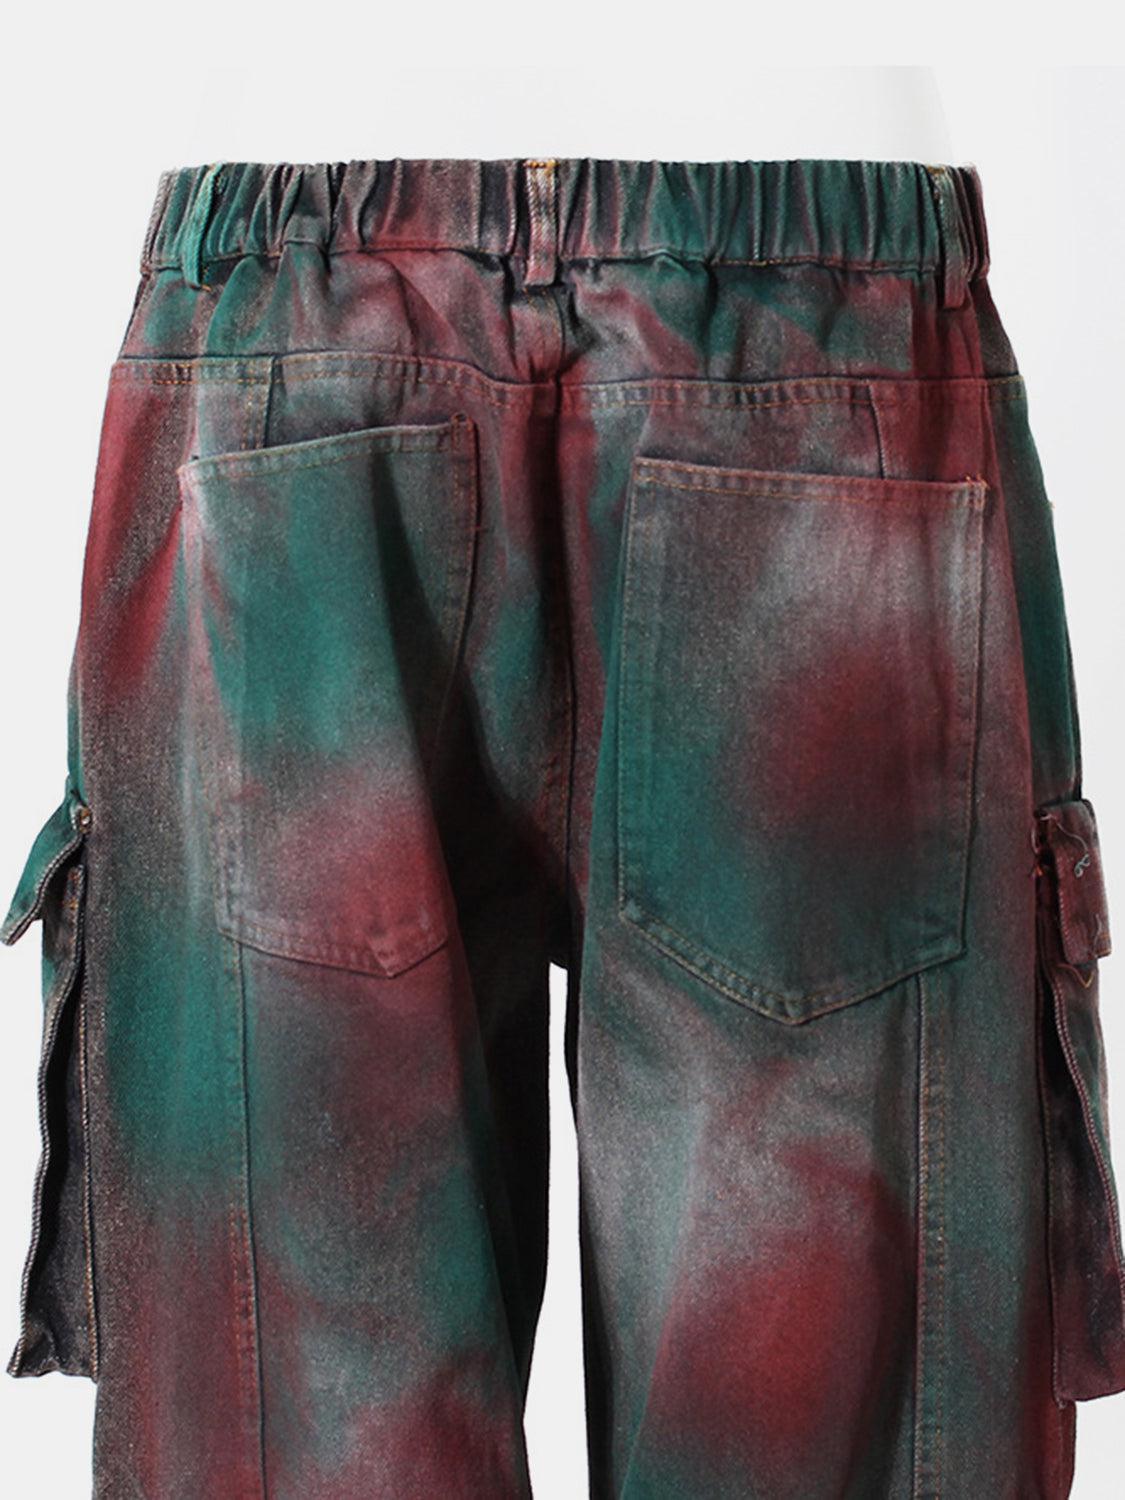 a pair of green and red pants with a tie dye pattern